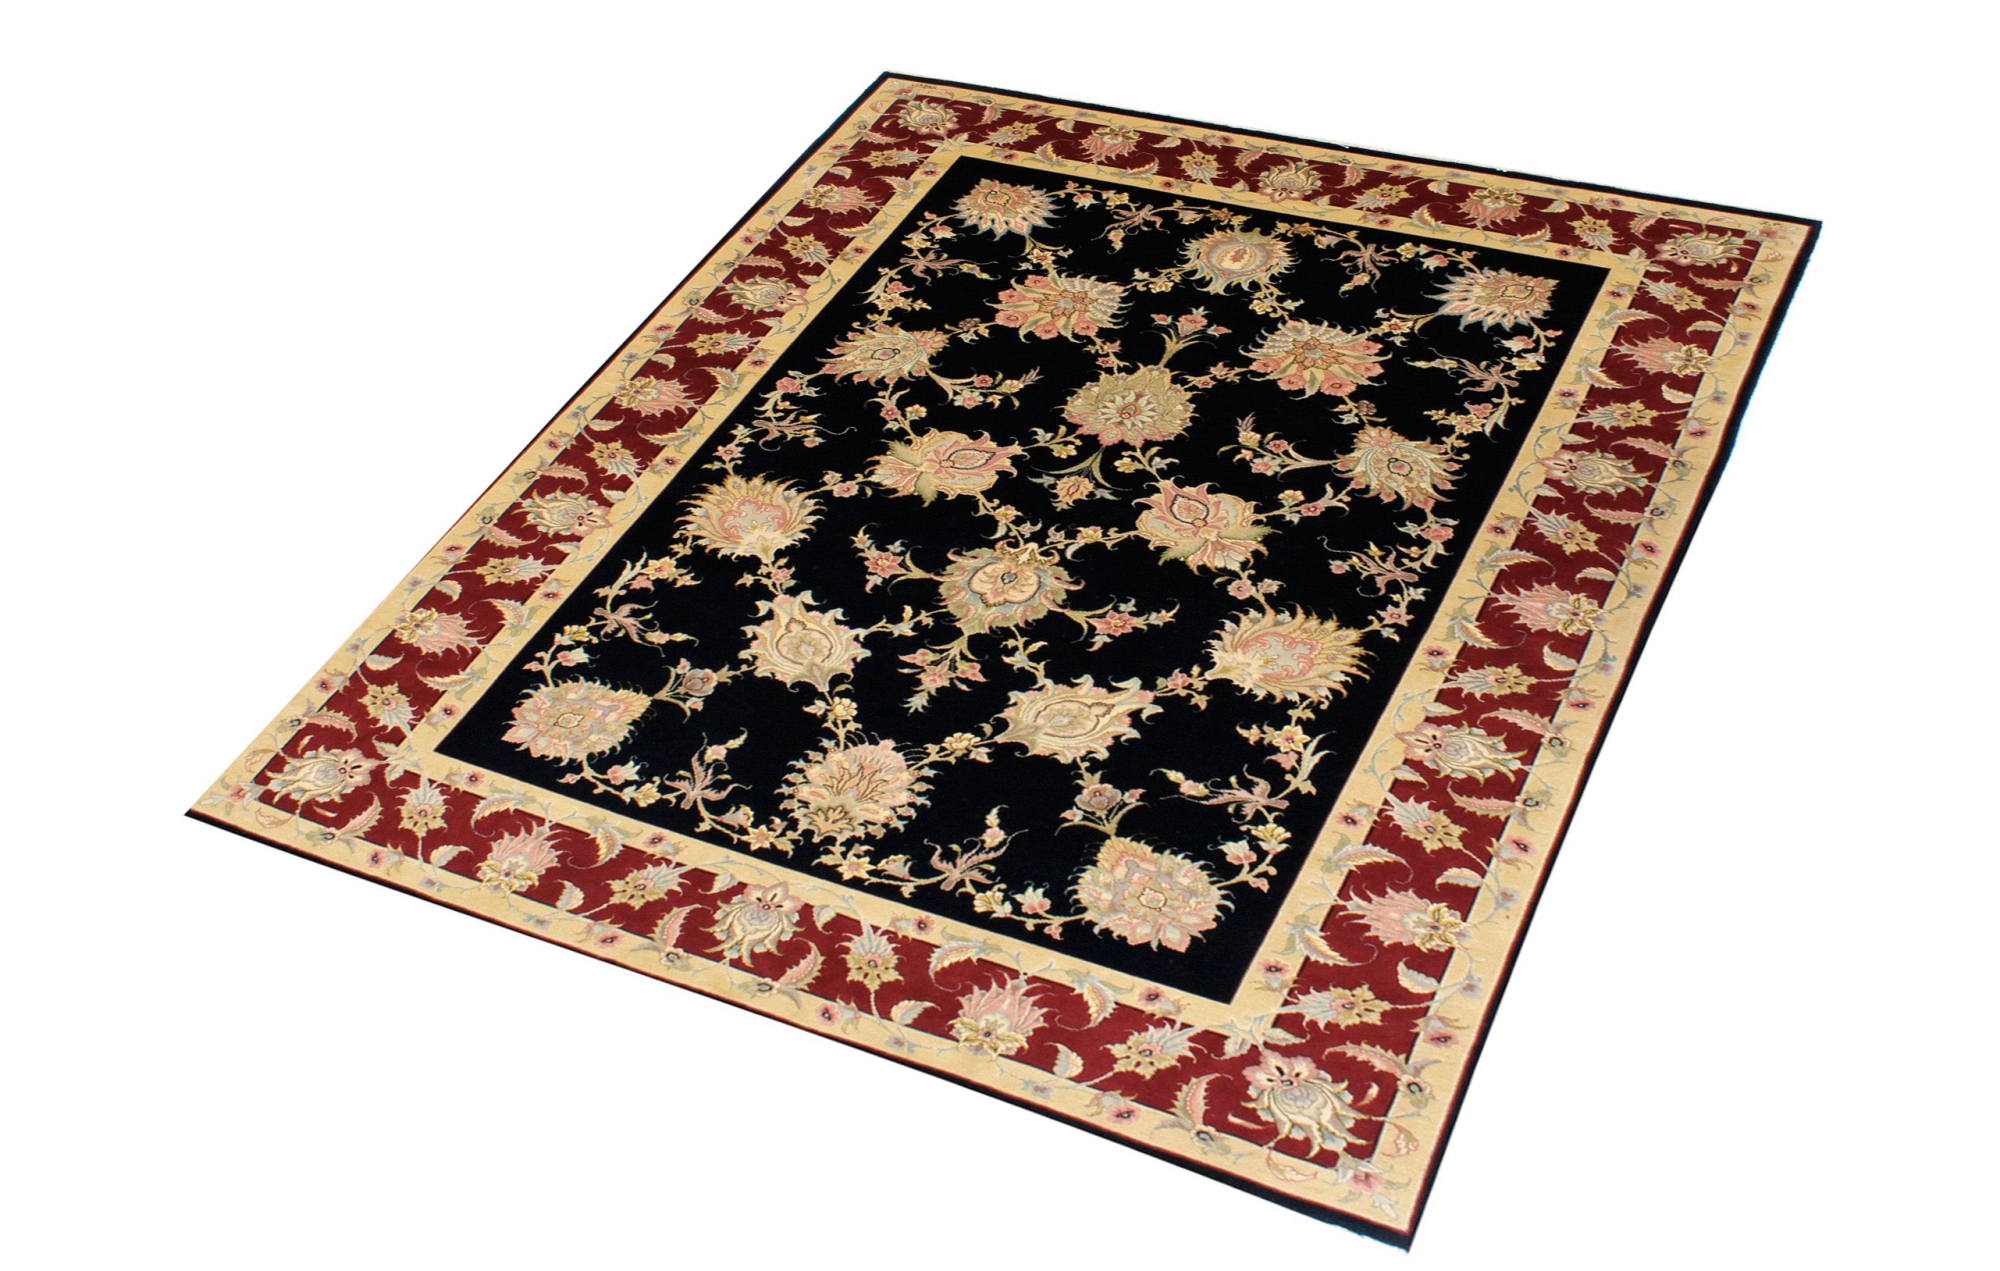 Area rug for living space and any room. Floor decor, rugs and carpets from Tabrizi Rugs. Tabriz Gol - 5'9